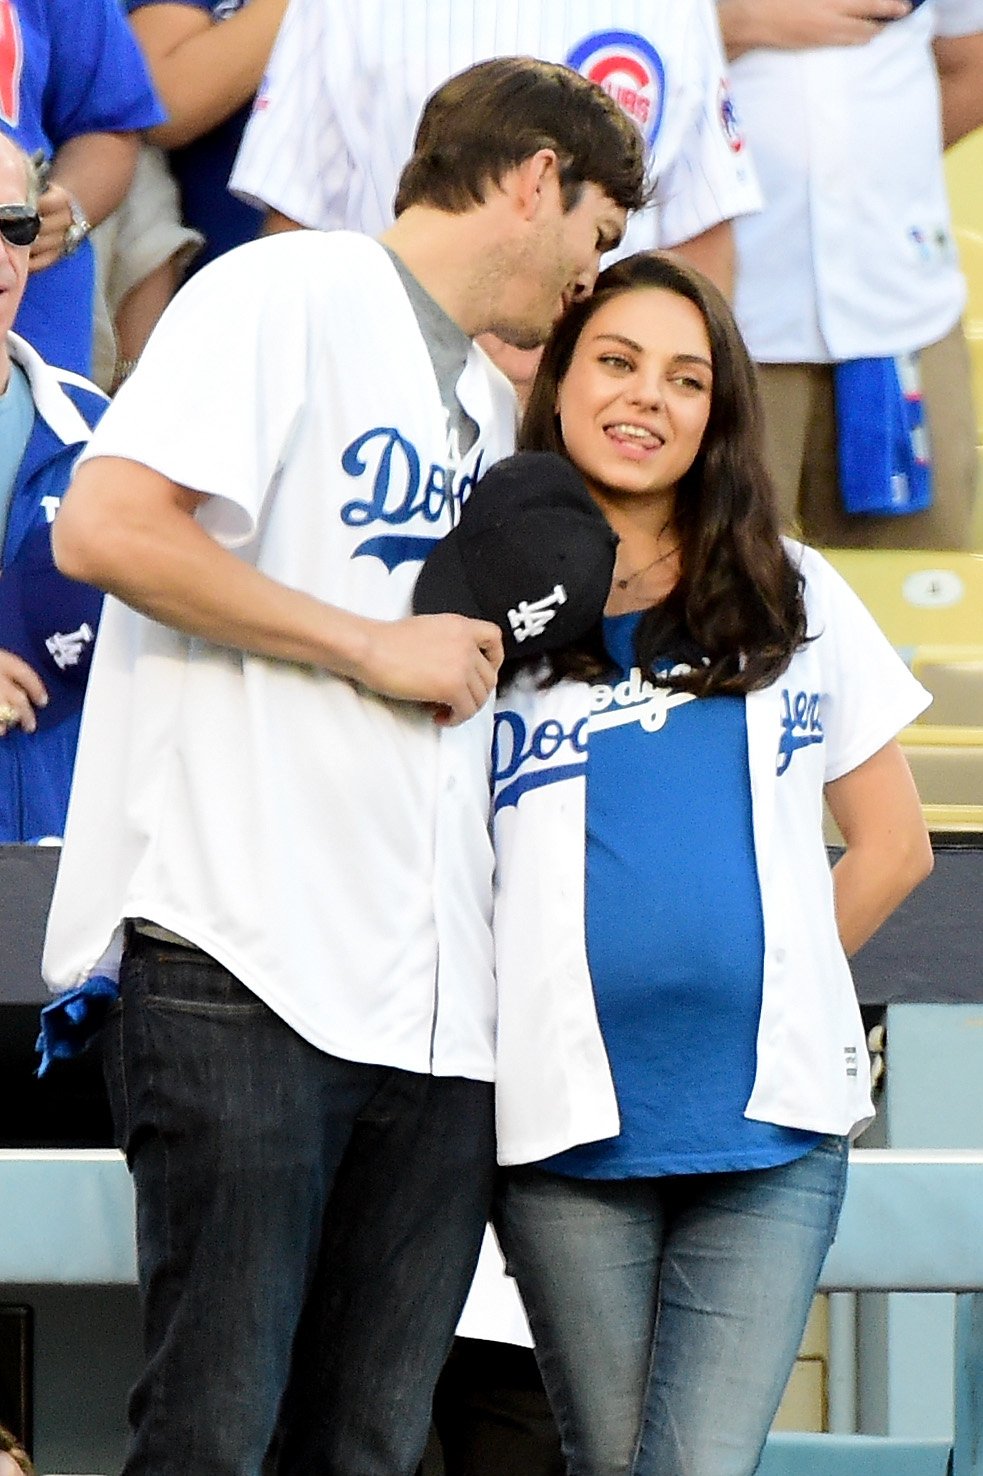 Ashton Kutcher and wife Mila Kunis on the field after they announced the Los Angeles Dodgers starting lineup at Dodger Stadium on October 19, 2016, in Los Angeles, California. | Source: Getty Images